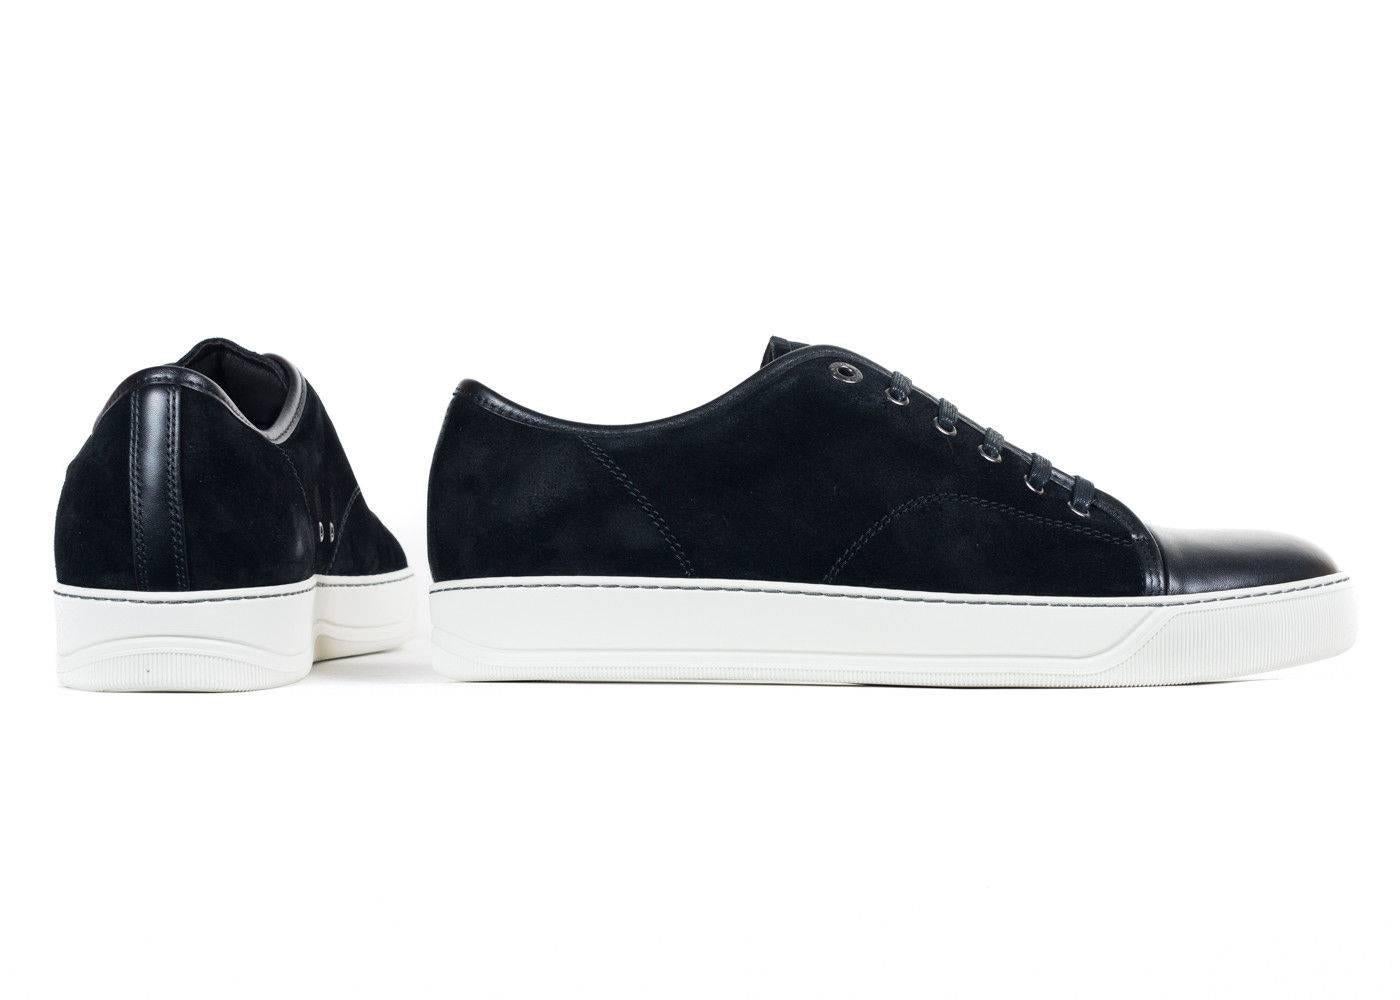 Lanvin Black Suede Nubuck Calfskin Cap Toe DDB1 Sneakers In New Condition For Sale In Brooklyn, NY